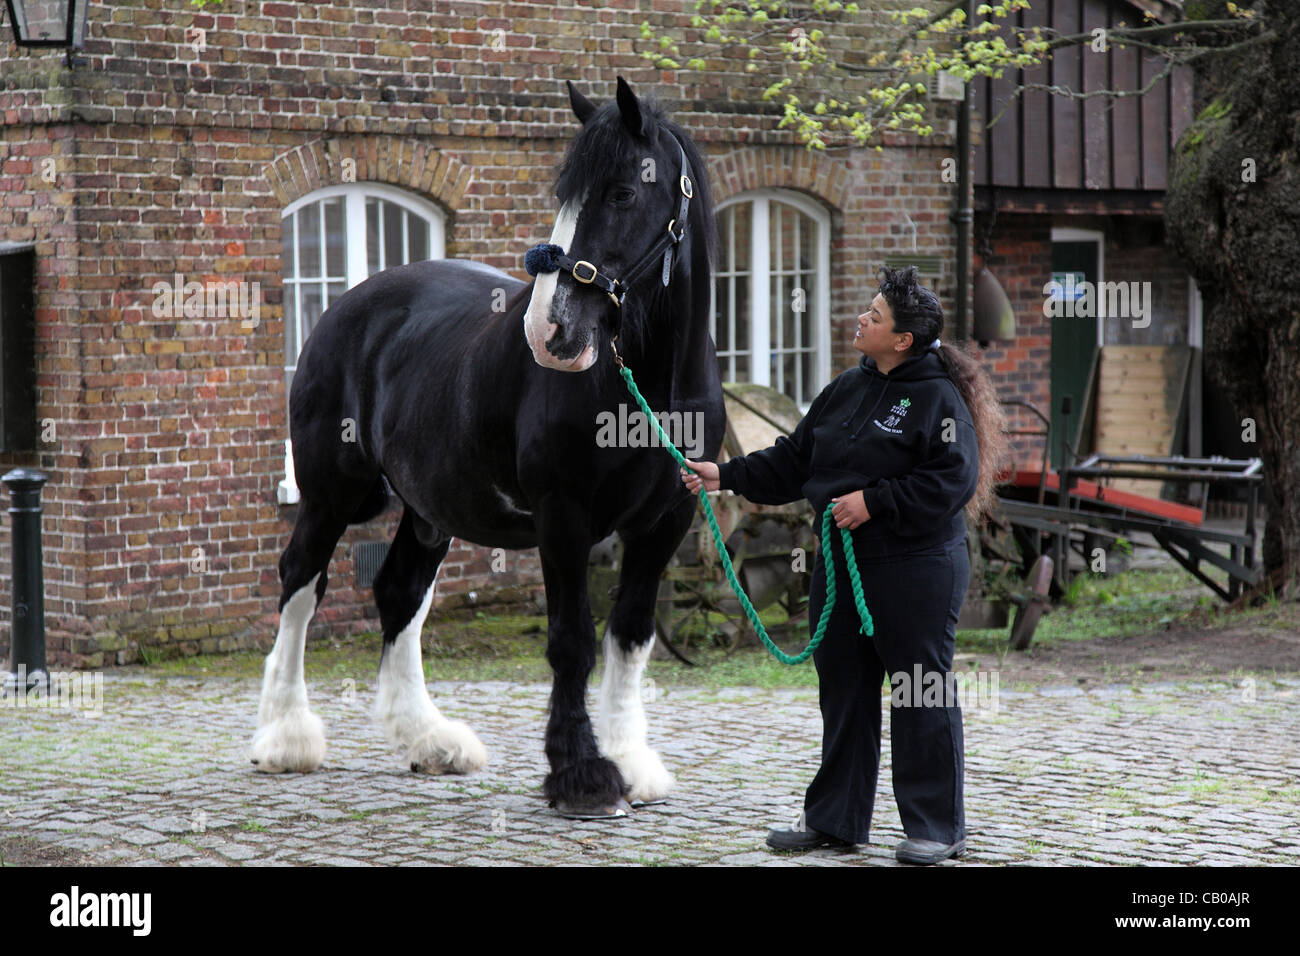 14/05/2012. Richmond Park, London, UK. Shire Horse 'Jed' who has worked in Richmond Park for the last 10 years is being presented with a commemorative retirement Rosette by Her Majesty Queen Elizabeth II, during the 'Wild London' Jubilee event. Pictured:Sandra Croxall and Jed. Stock Photo